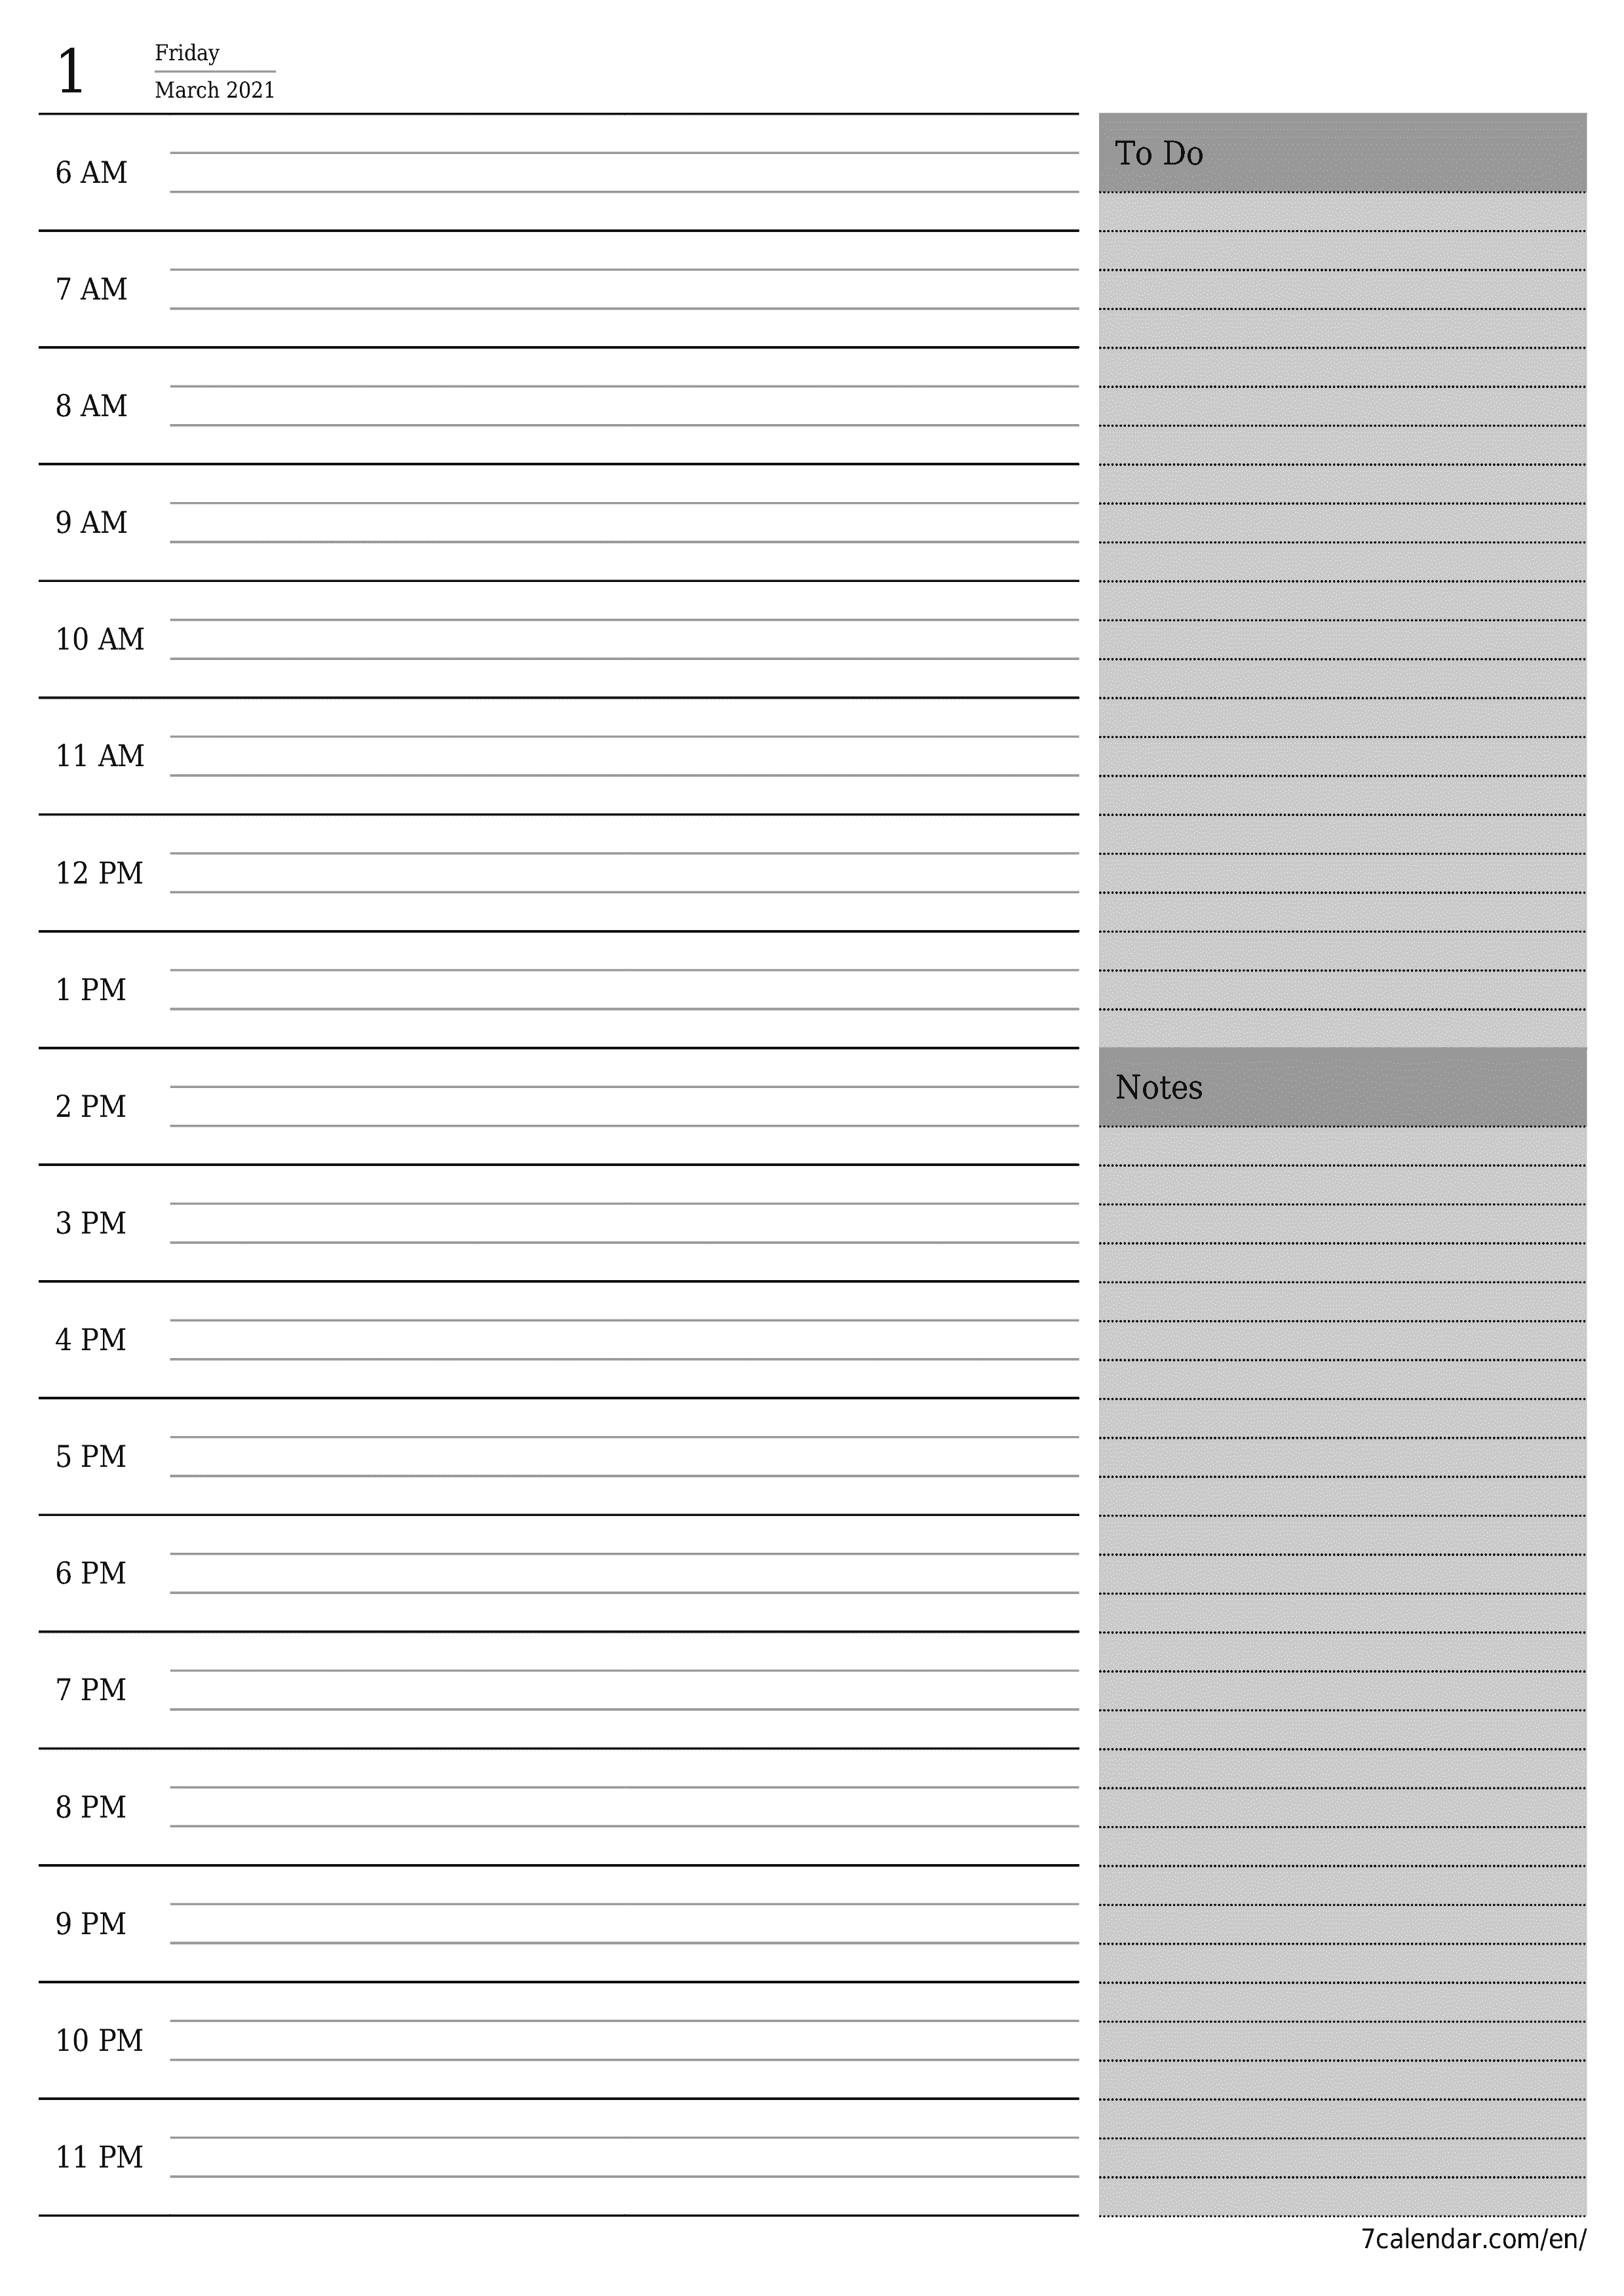 Blank daily printable calendar and planner for day March 2021 with notes, save and print to PDF PNG English